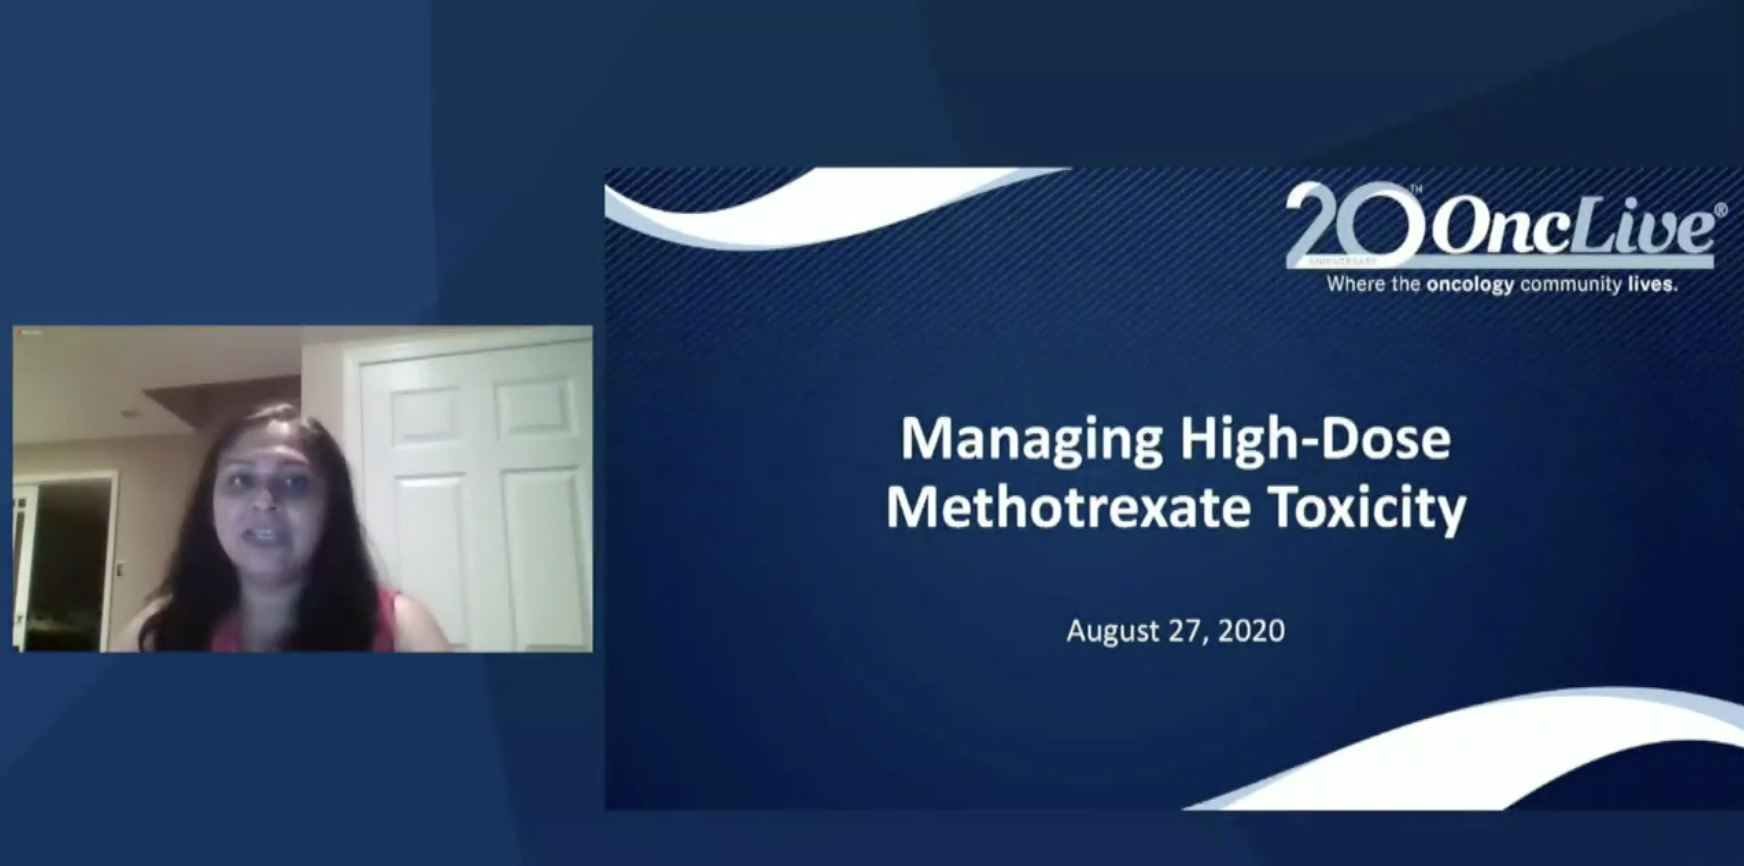  Managing High-Dose Methotrexate Toxicity